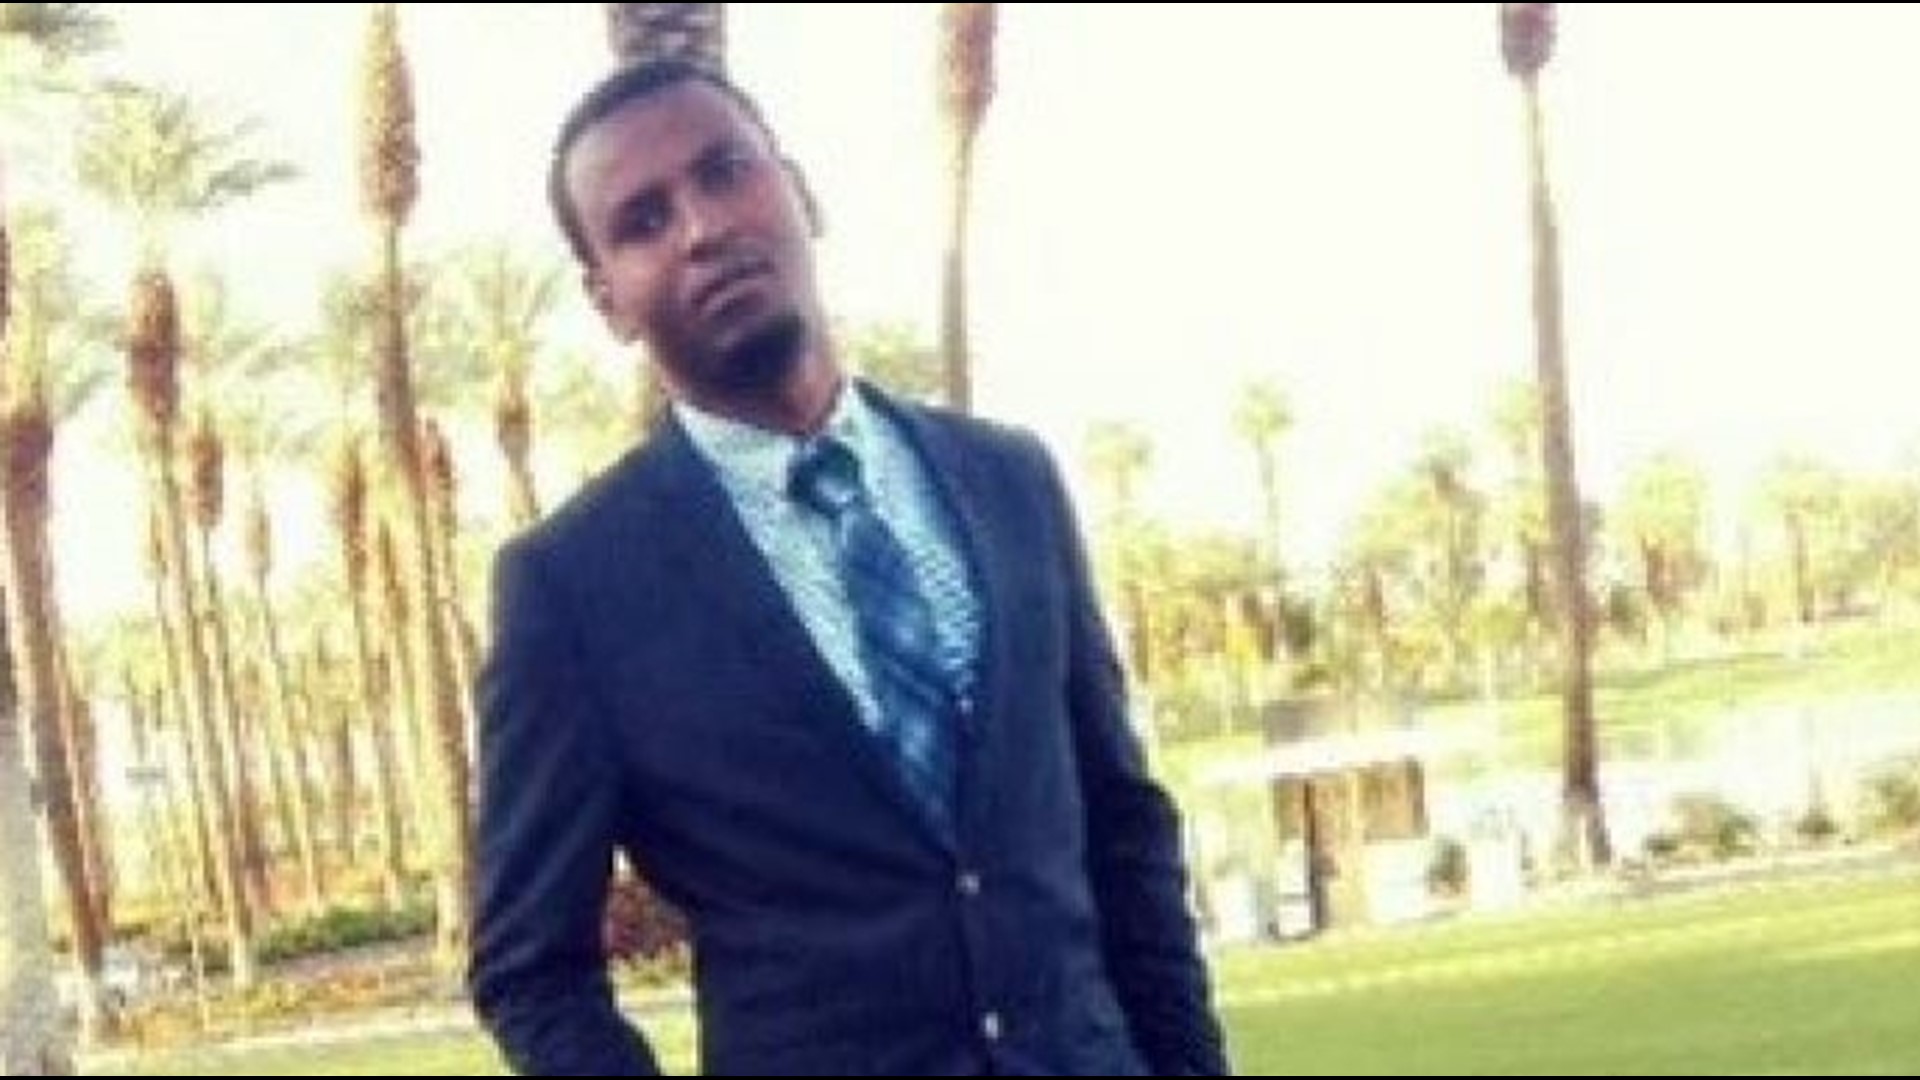 Ali Osman was fatally shot by Phoenix police officers last year after he allegedly threw rocks at a police cruiser.